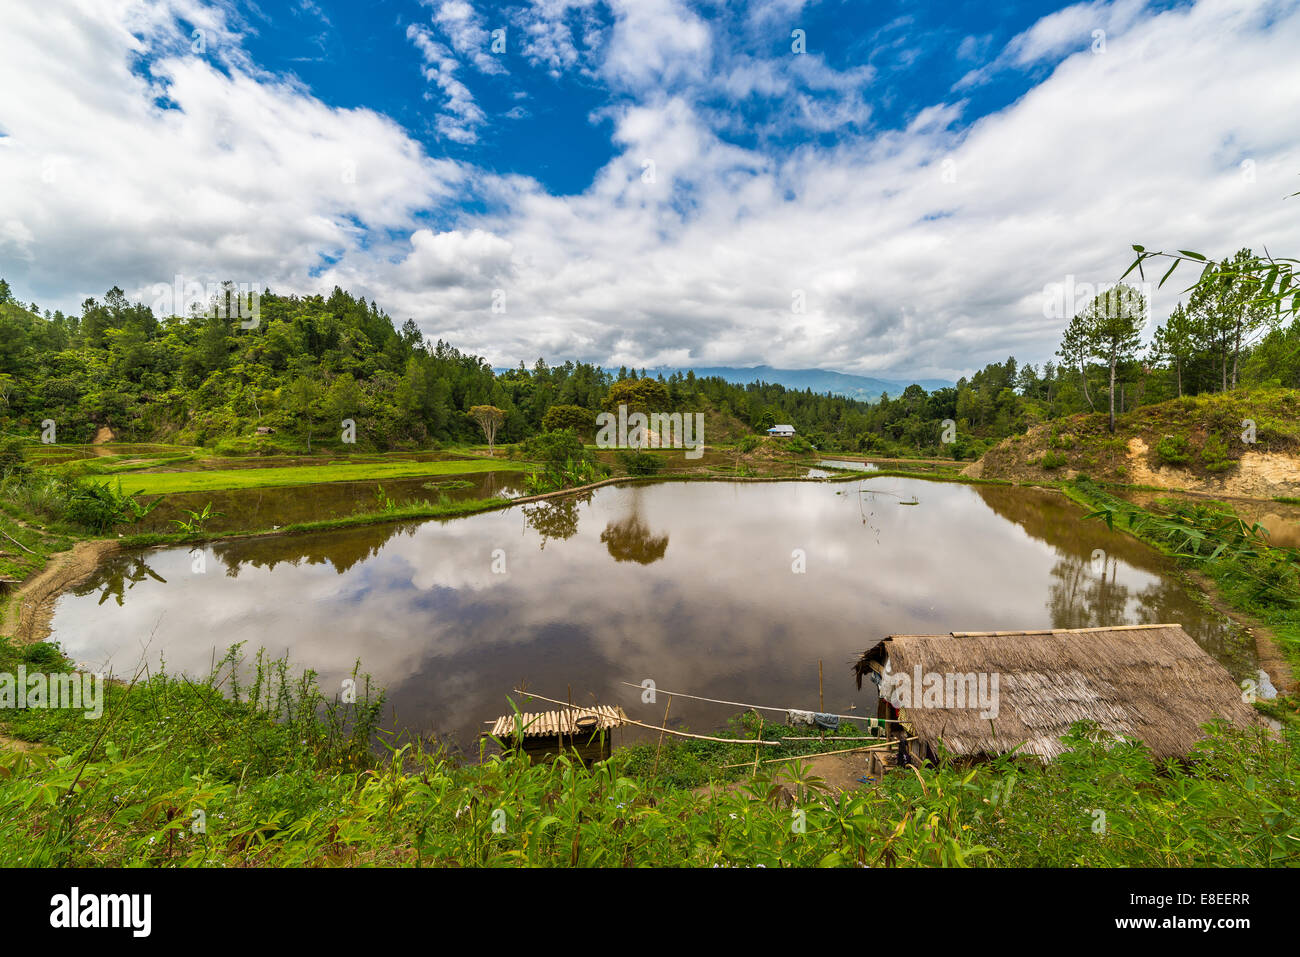 Stunning landscape and bright rice fields in Tana Toraja, South Sulawesi, Indonesia. Wide angle view. Stock Photo